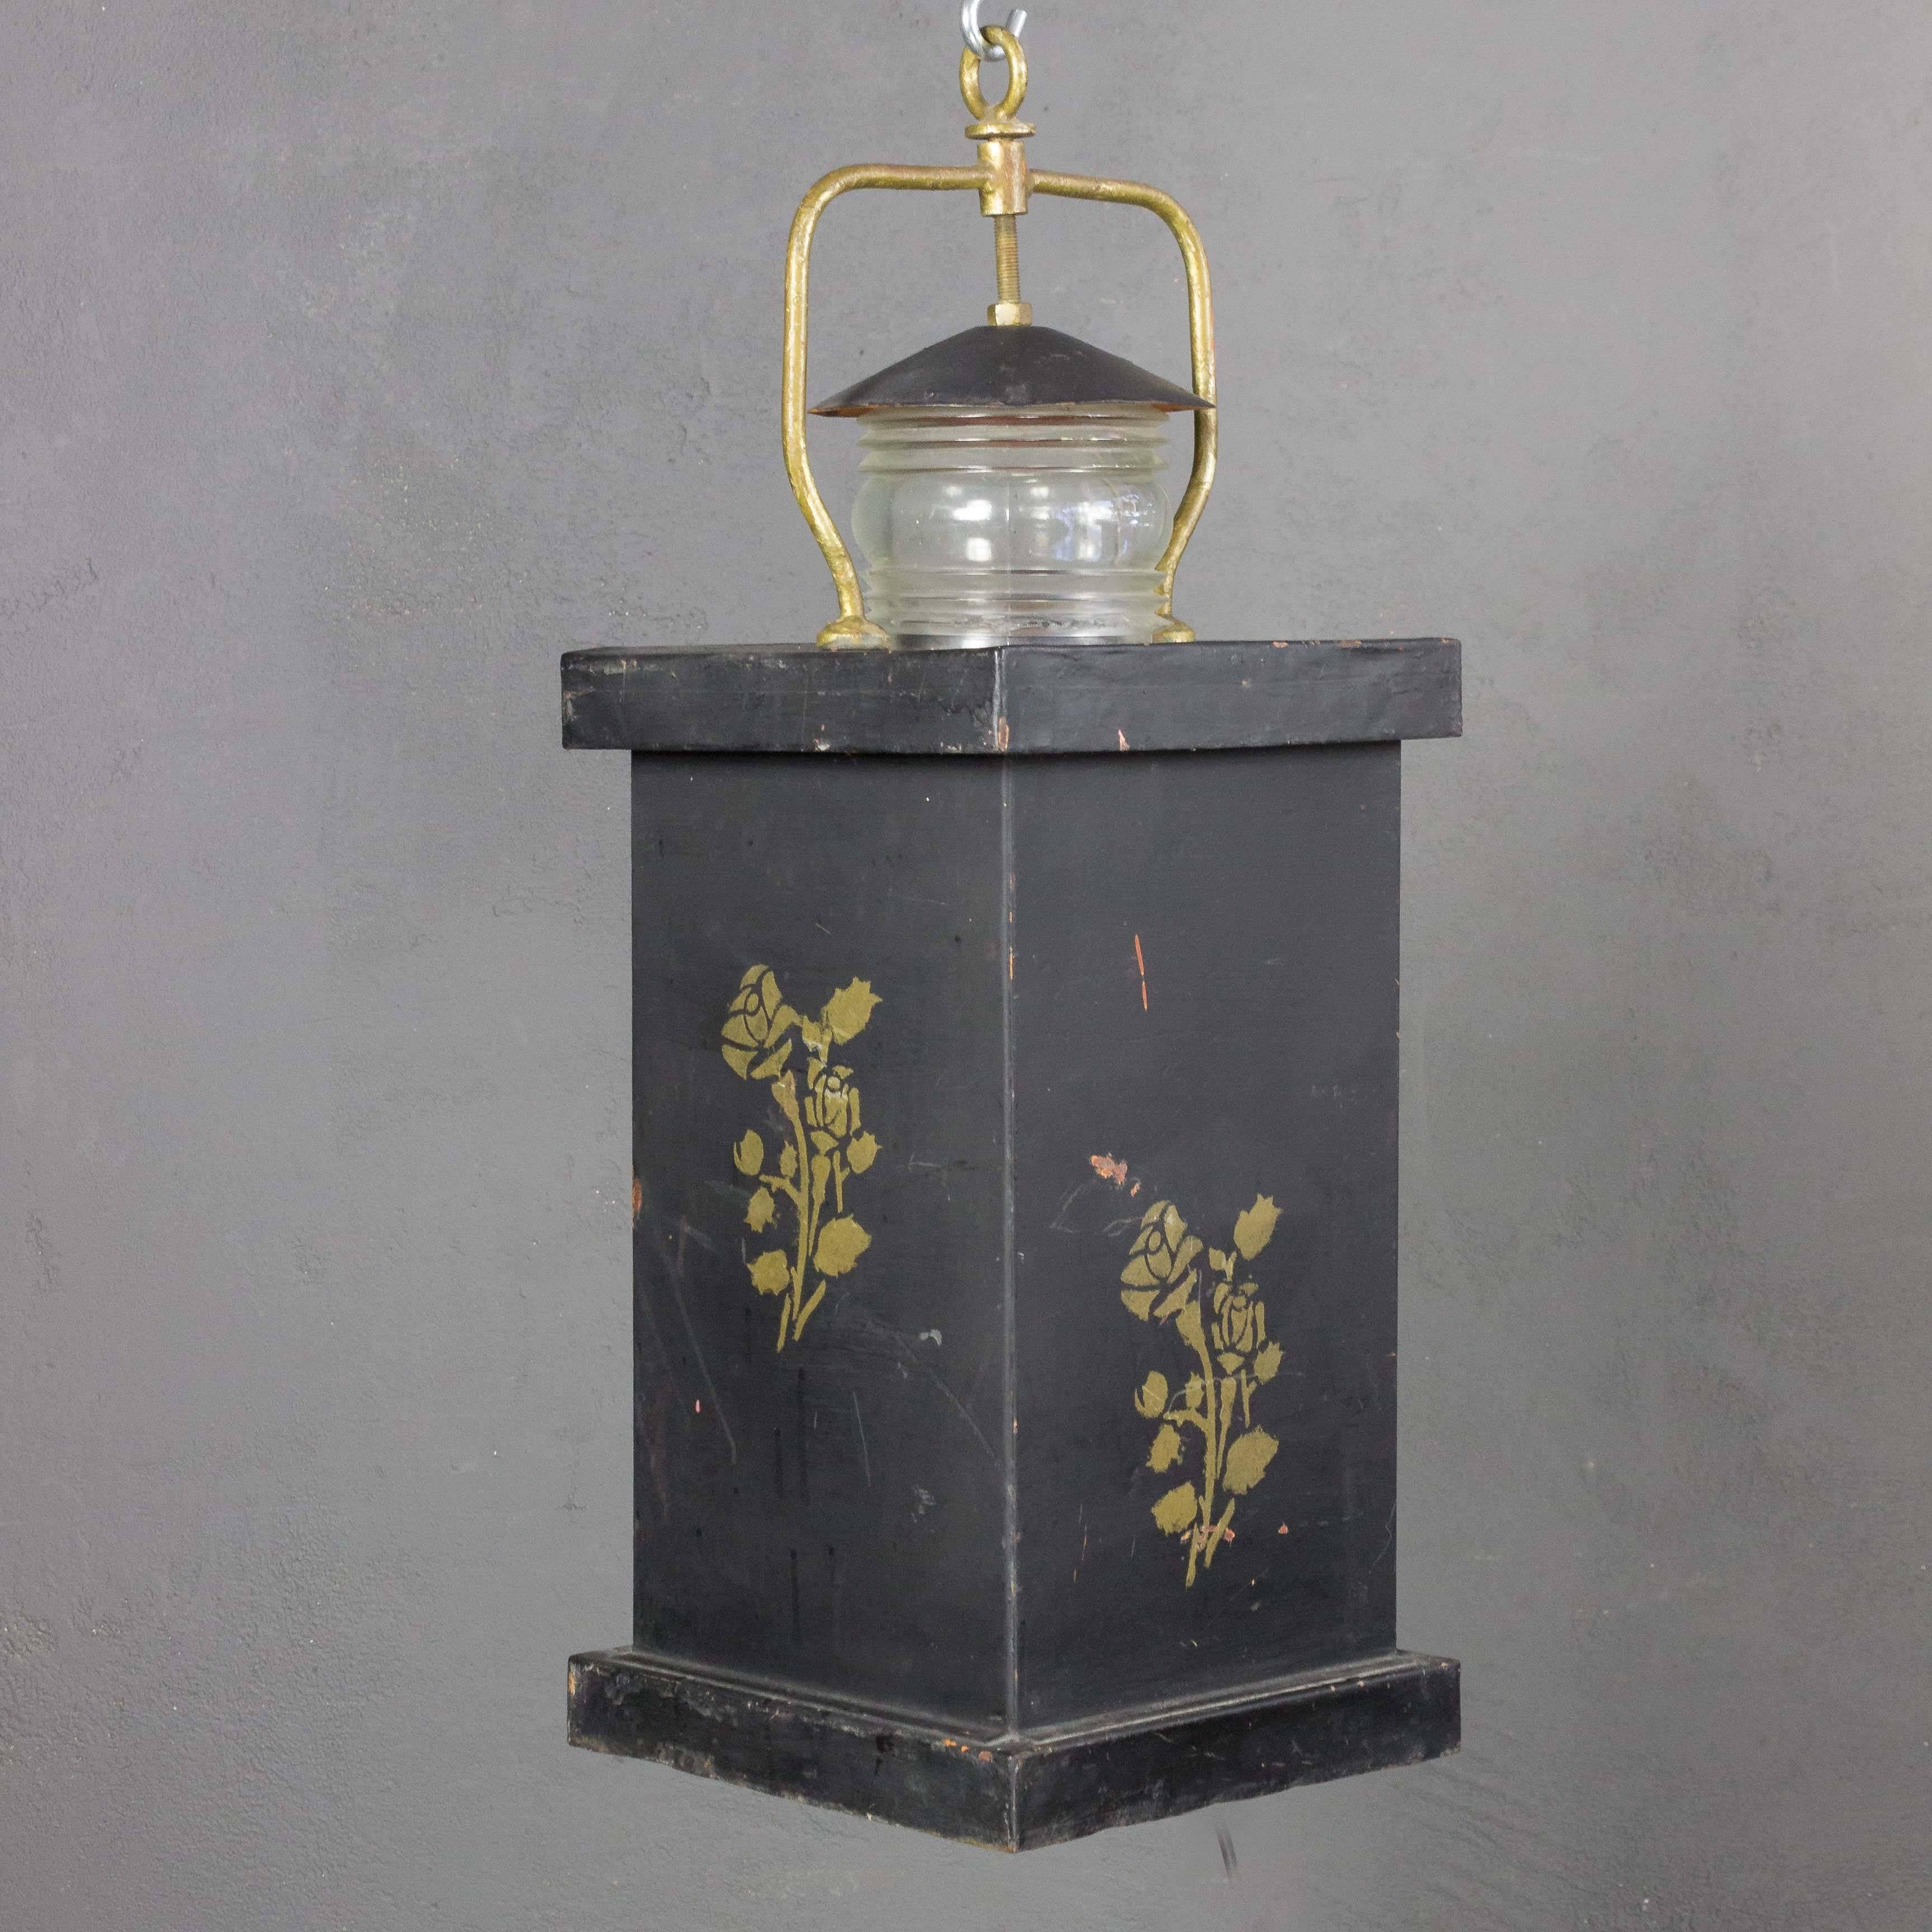 An unusual pair of French barge lanterns in black tole with applied rose designs, early 20th century.